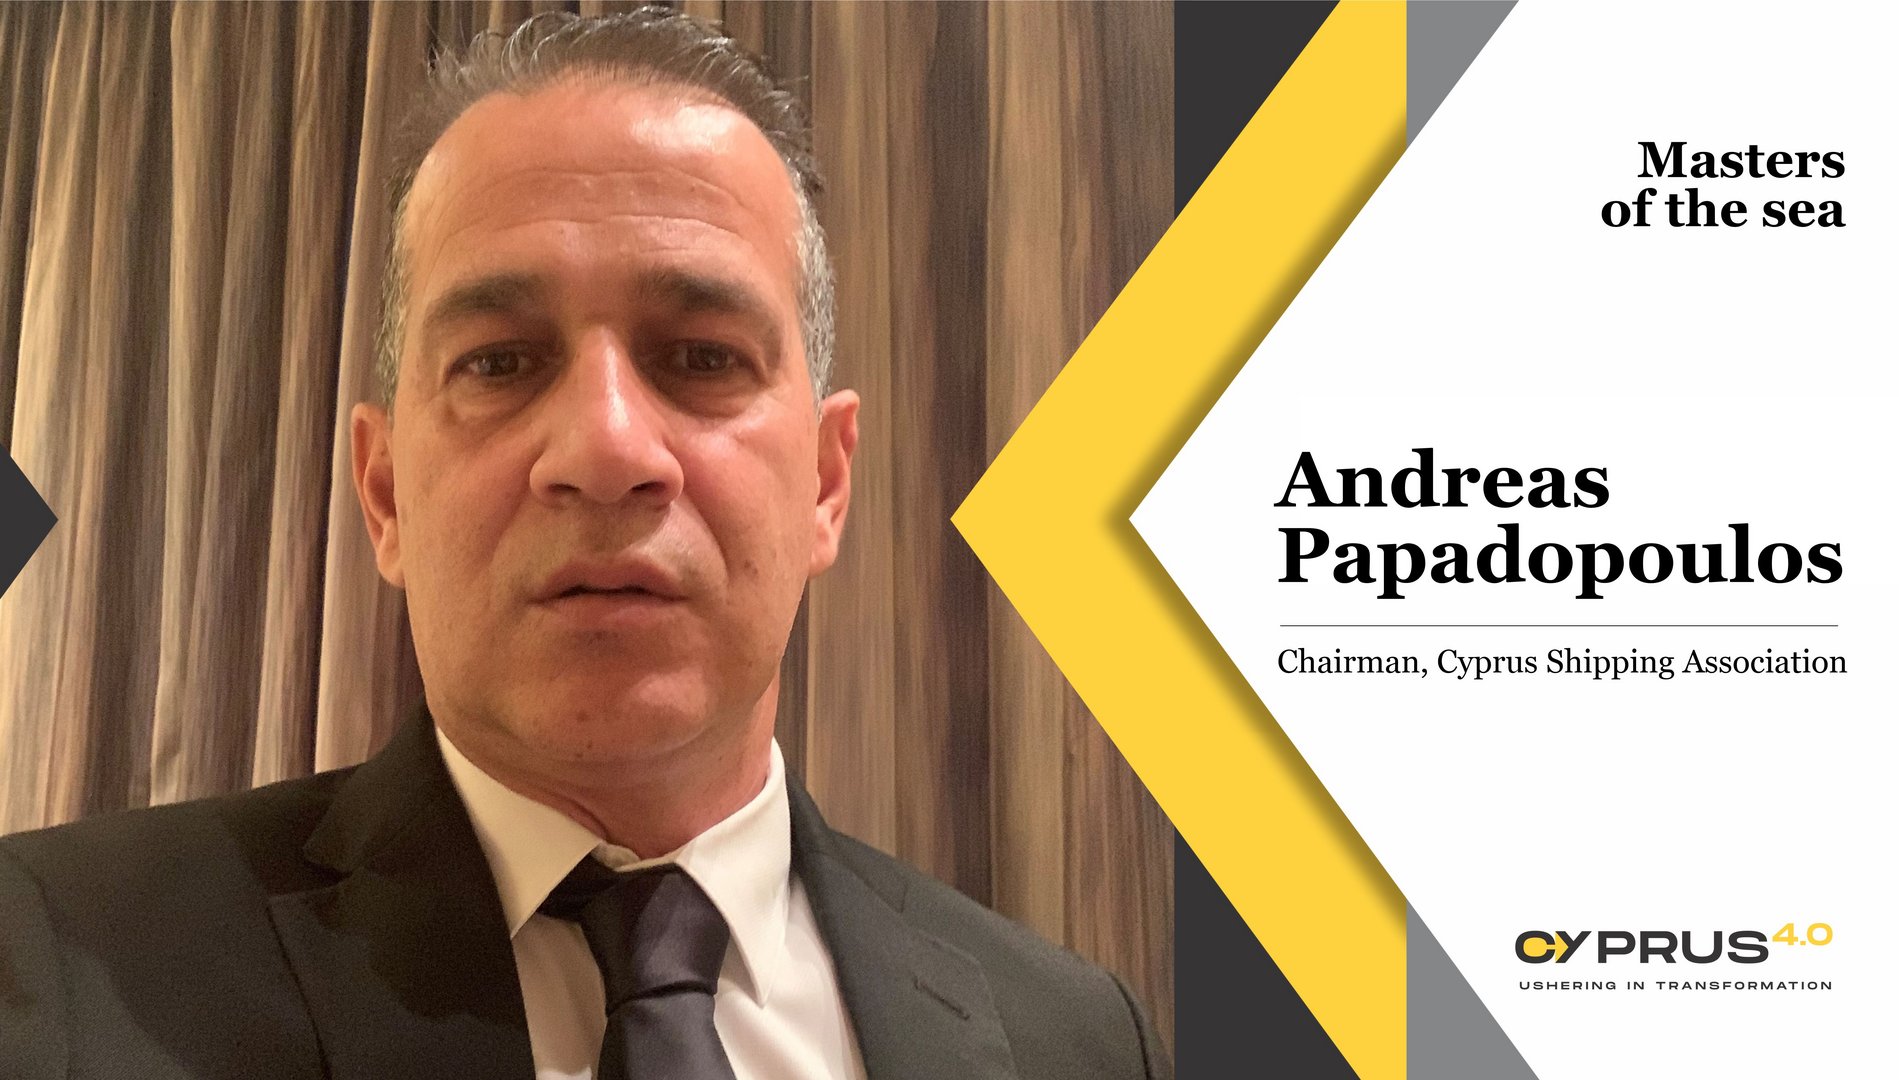 image Andreas Papadopoulos: Chairman of the Cyprus Shipping Association